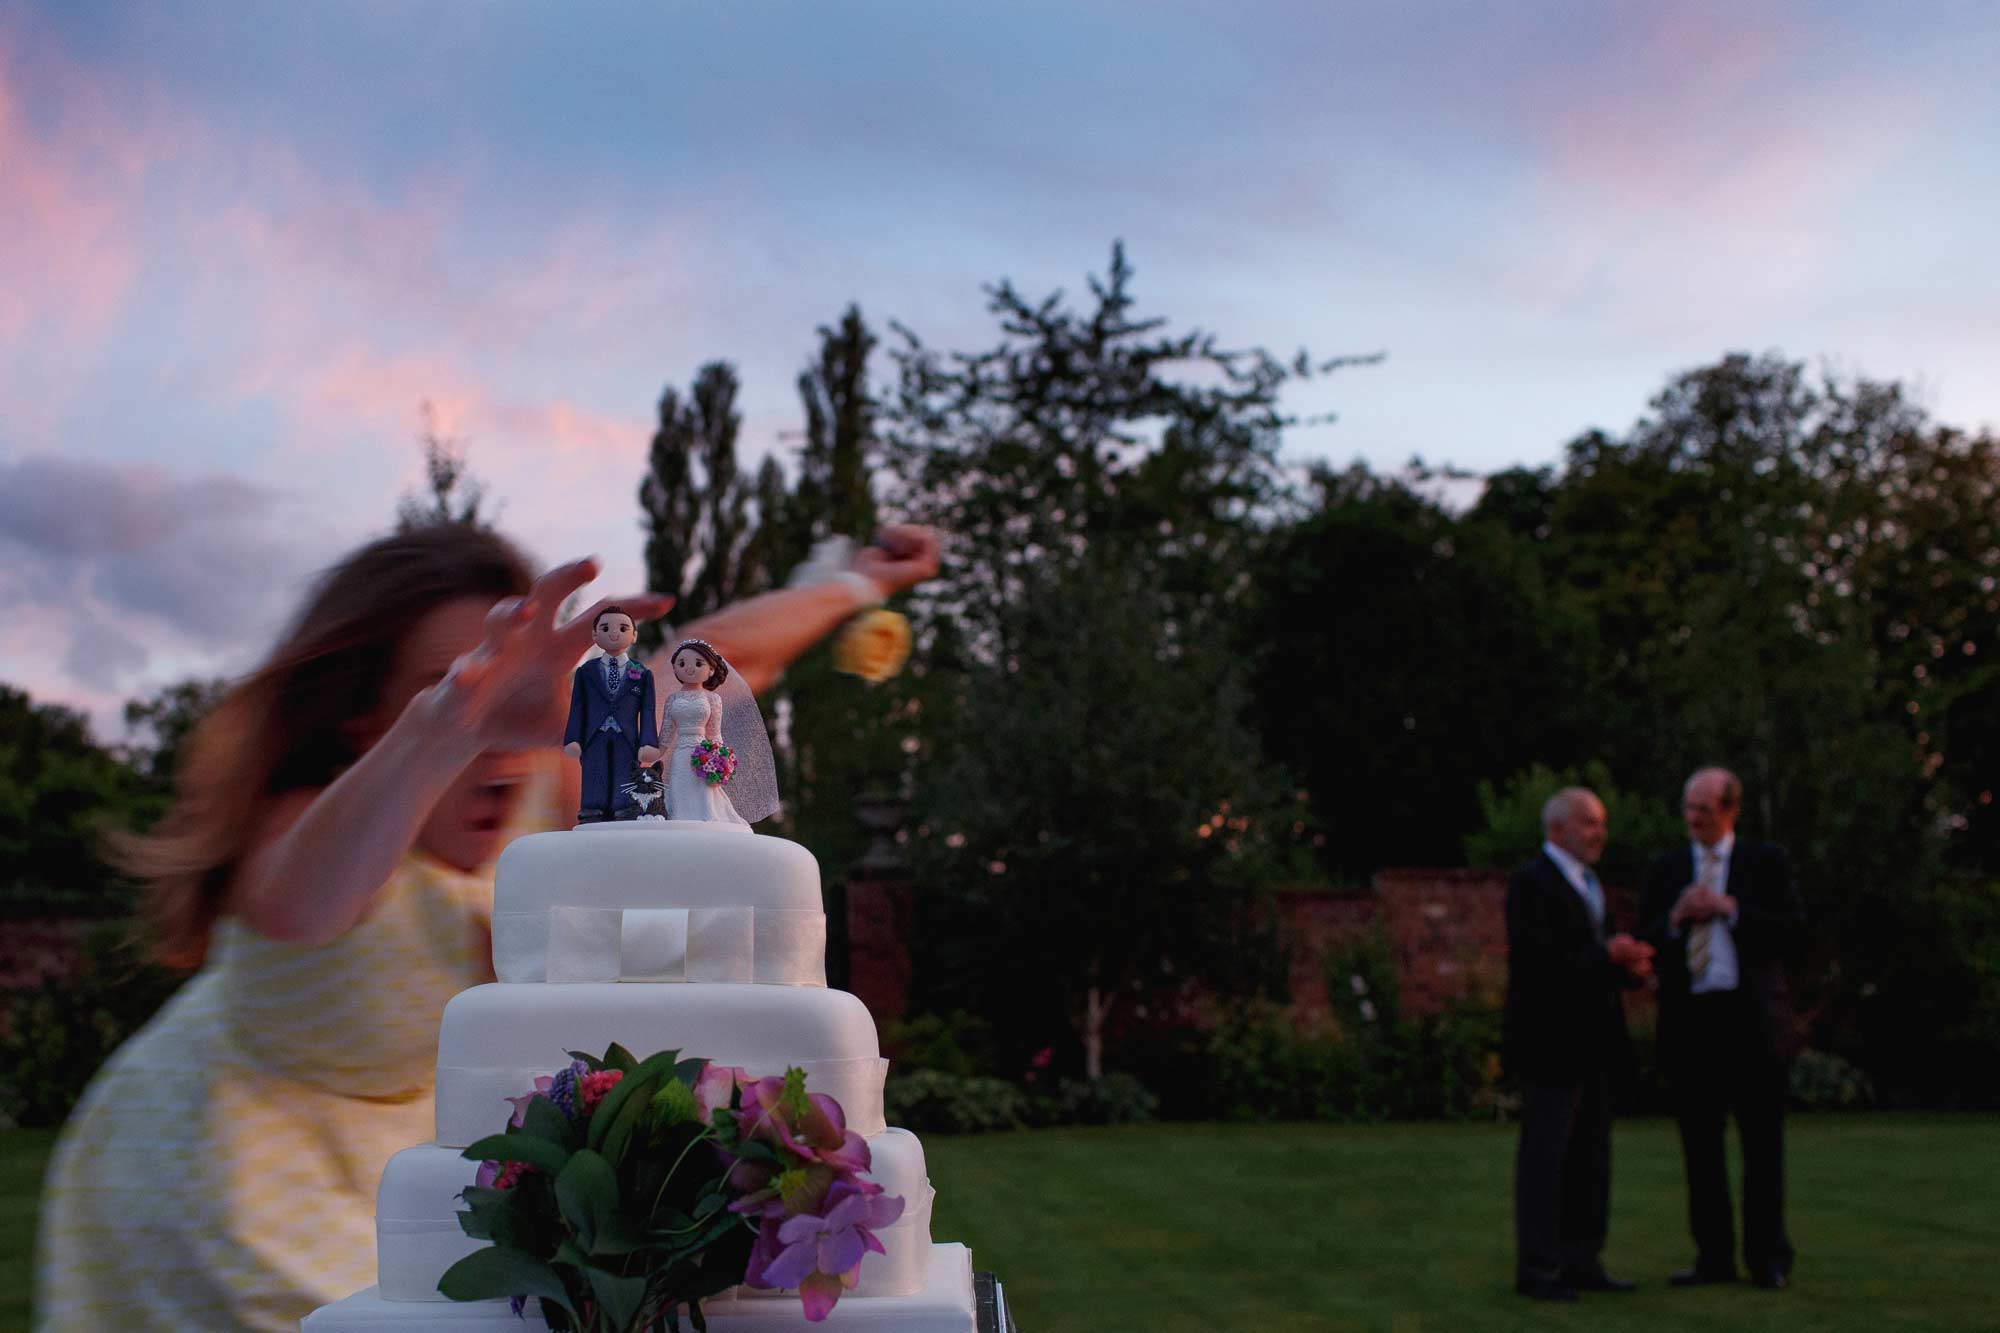 award wining wedding photograph of a wedding cake almost being knocked over